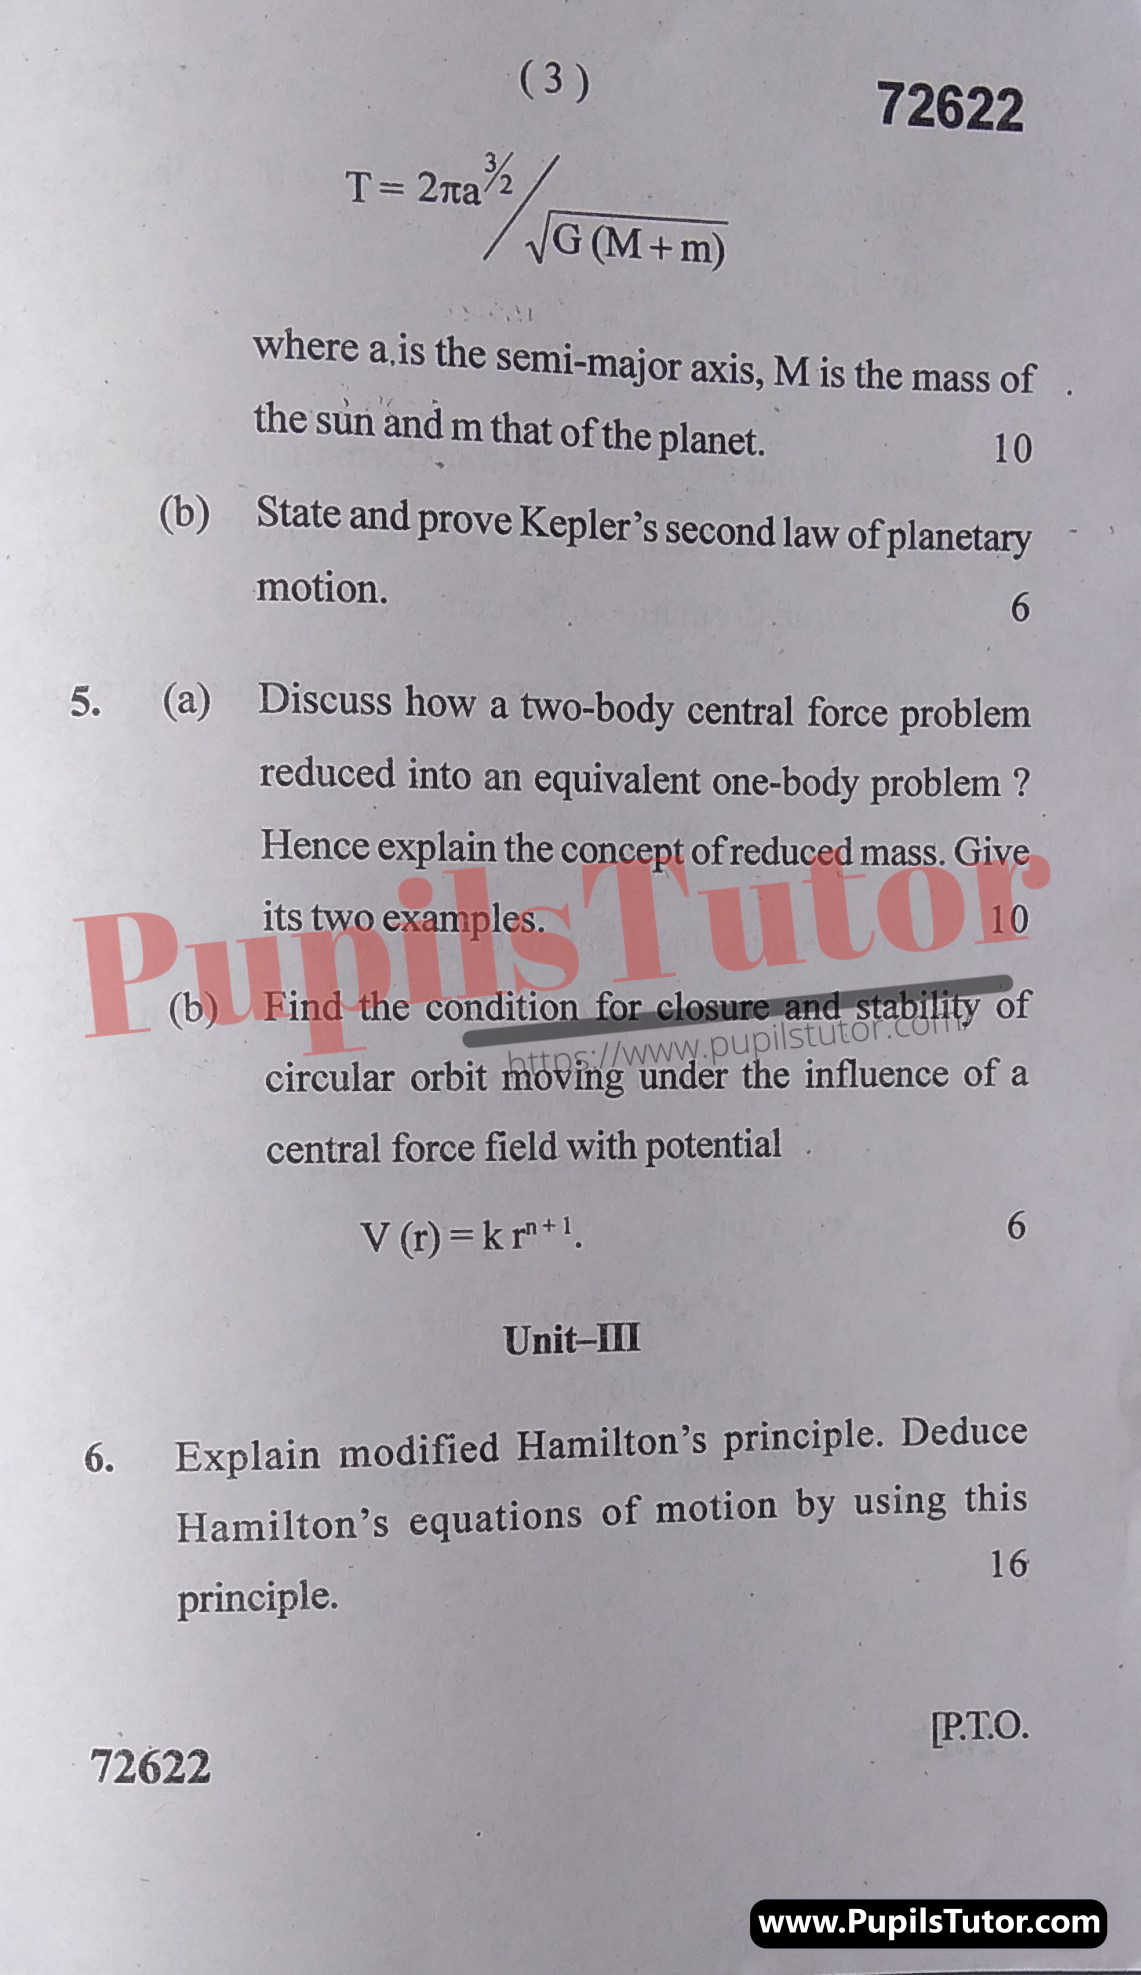 Free Download PDF Of M.D. University M.Sc. [Physics] First Semester Latest Question Paper For Classical Mechanics Subject (Page 3) - https://www.pupilstutor.com